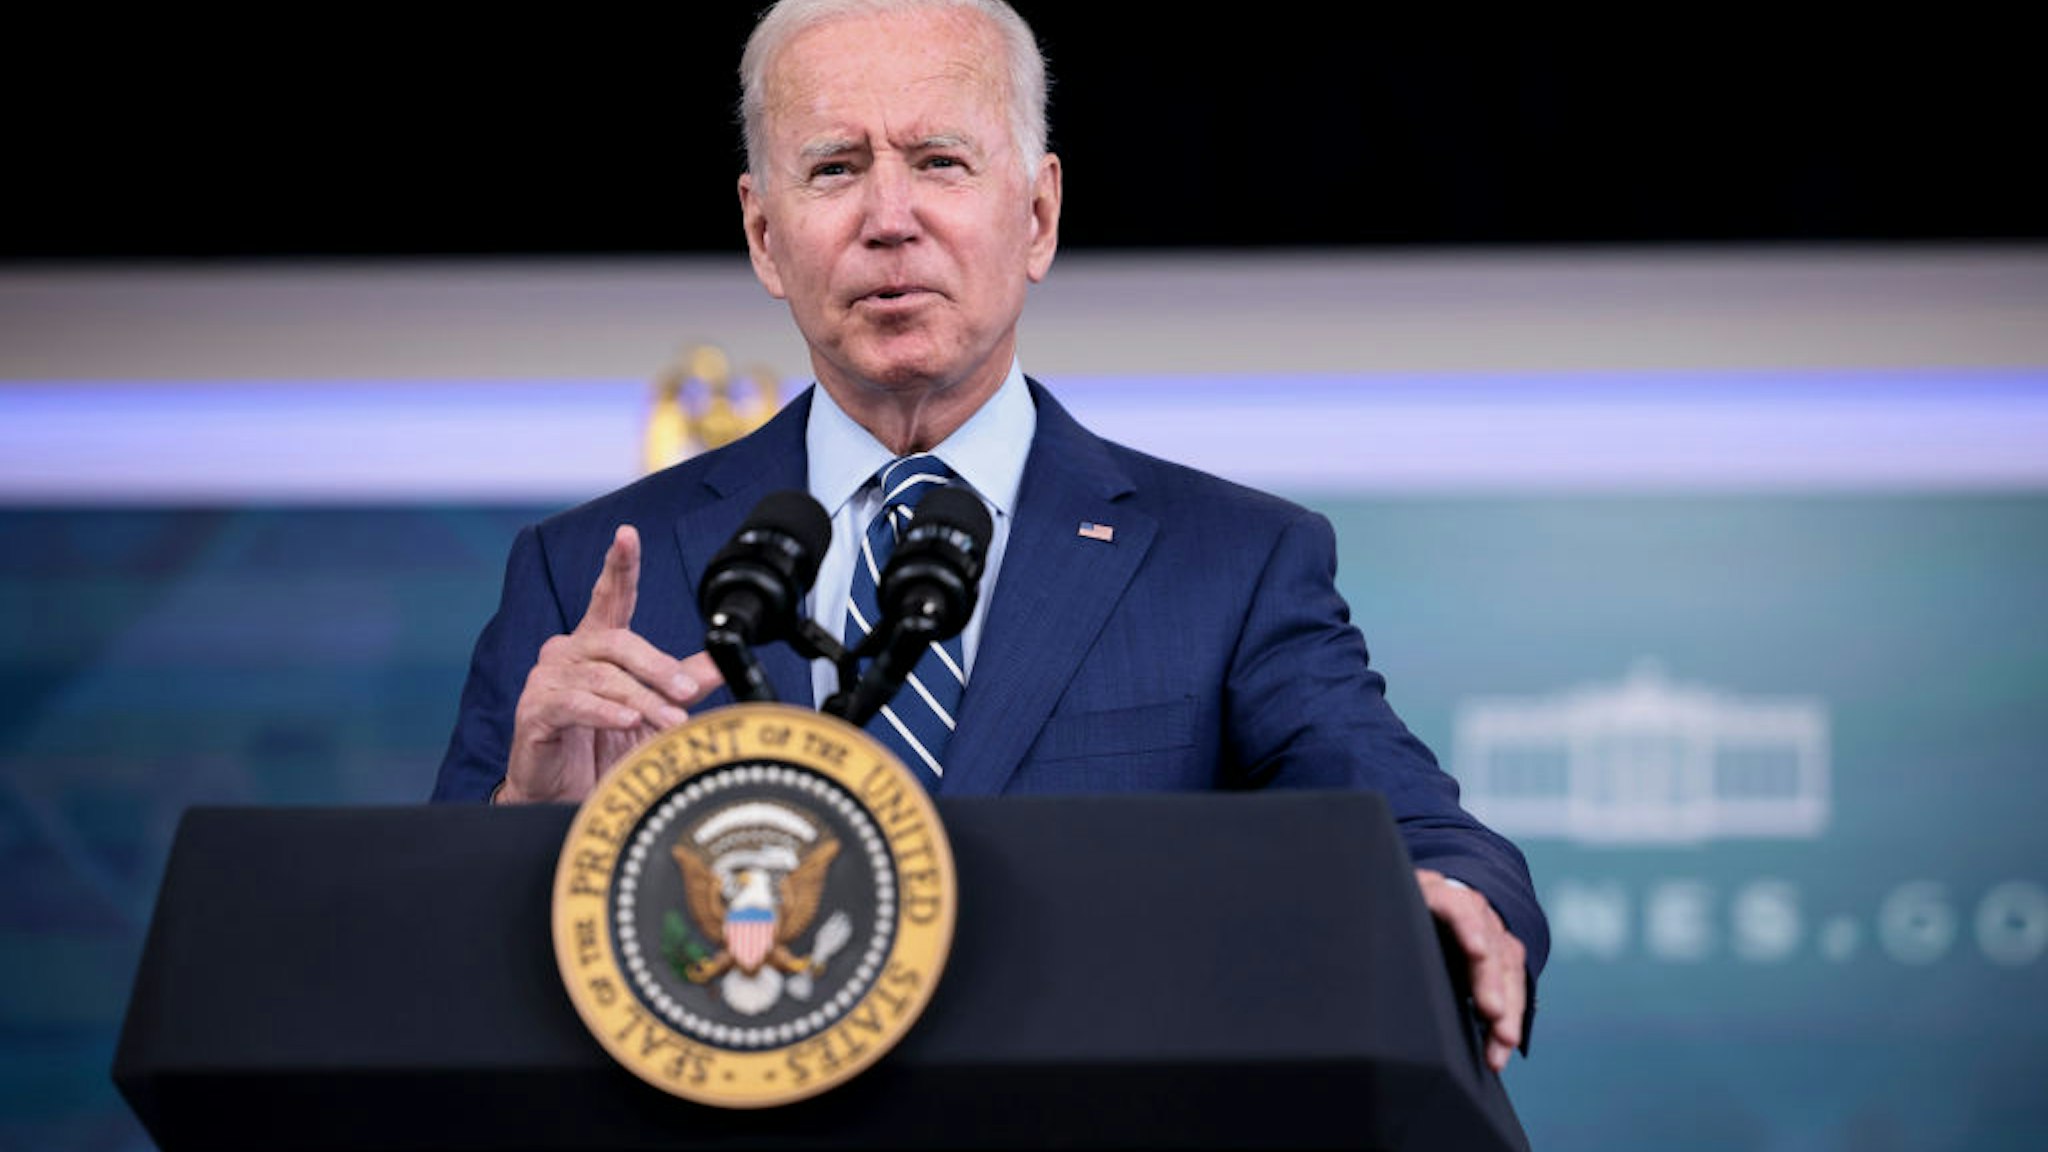 U.S. President Joe Biden delivers remarks ahead of receiving a third dose of the Pfizer/BioNTech Covid-19 vaccine in the South Court Auditorium in the White House September 27, 2021 in Washington, DC.